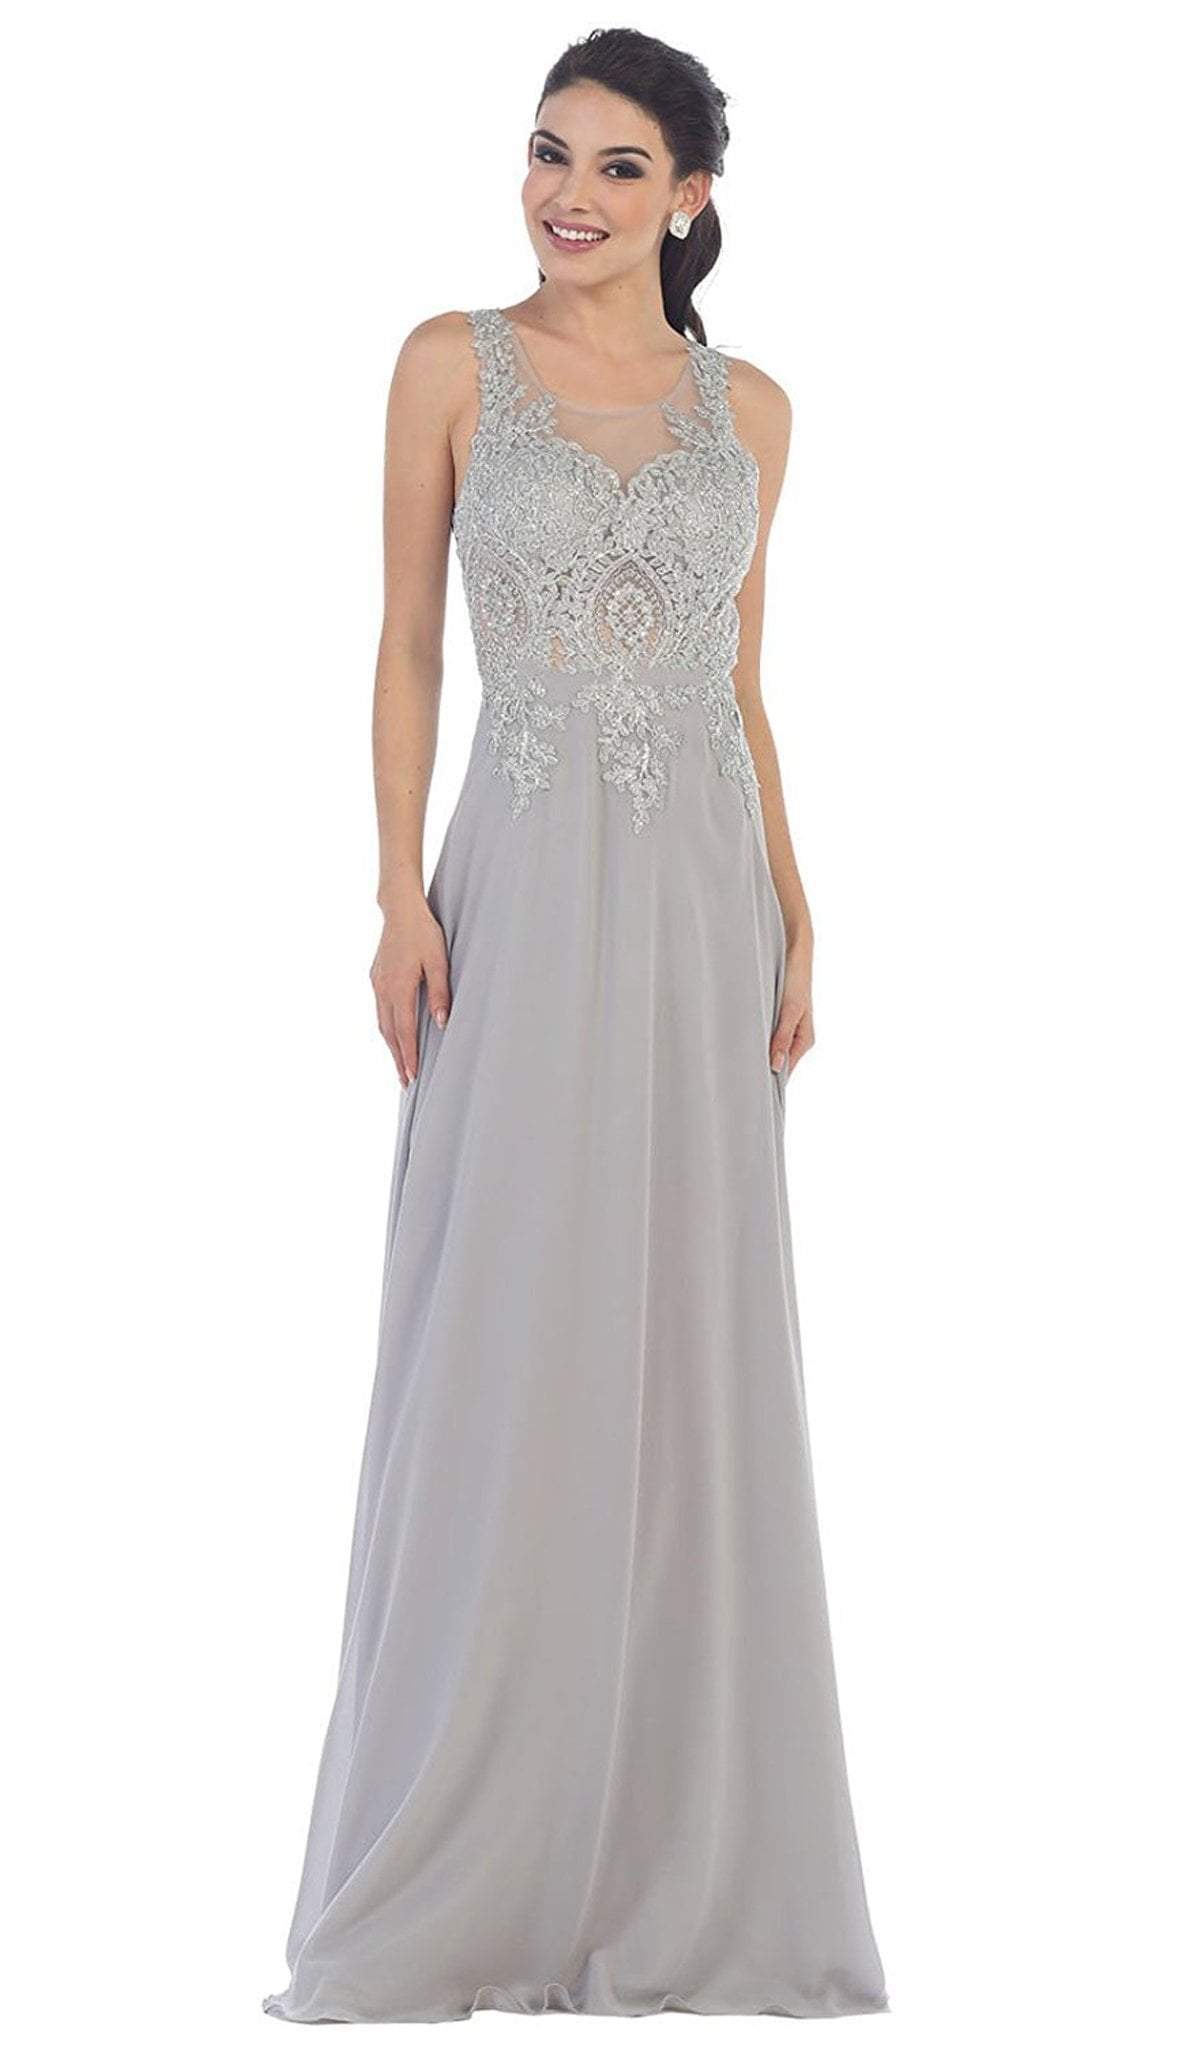 May Queen - Illusion Ornate Lace Prom Gown
